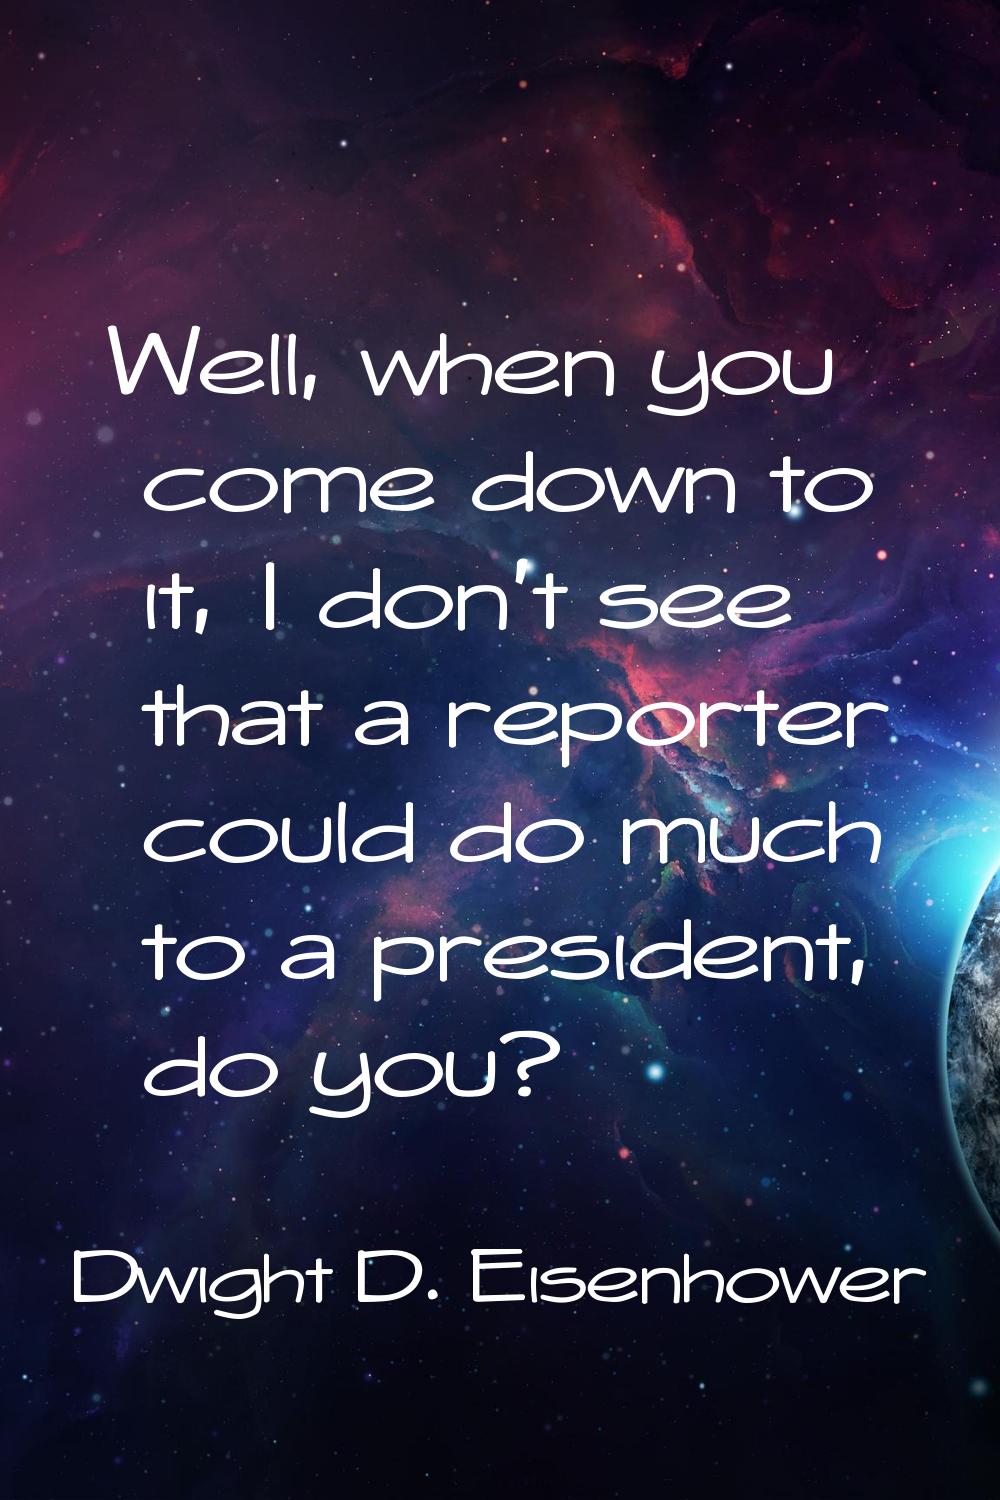 Well, when you come down to it, I don't see that a reporter could do much to a president, do you?